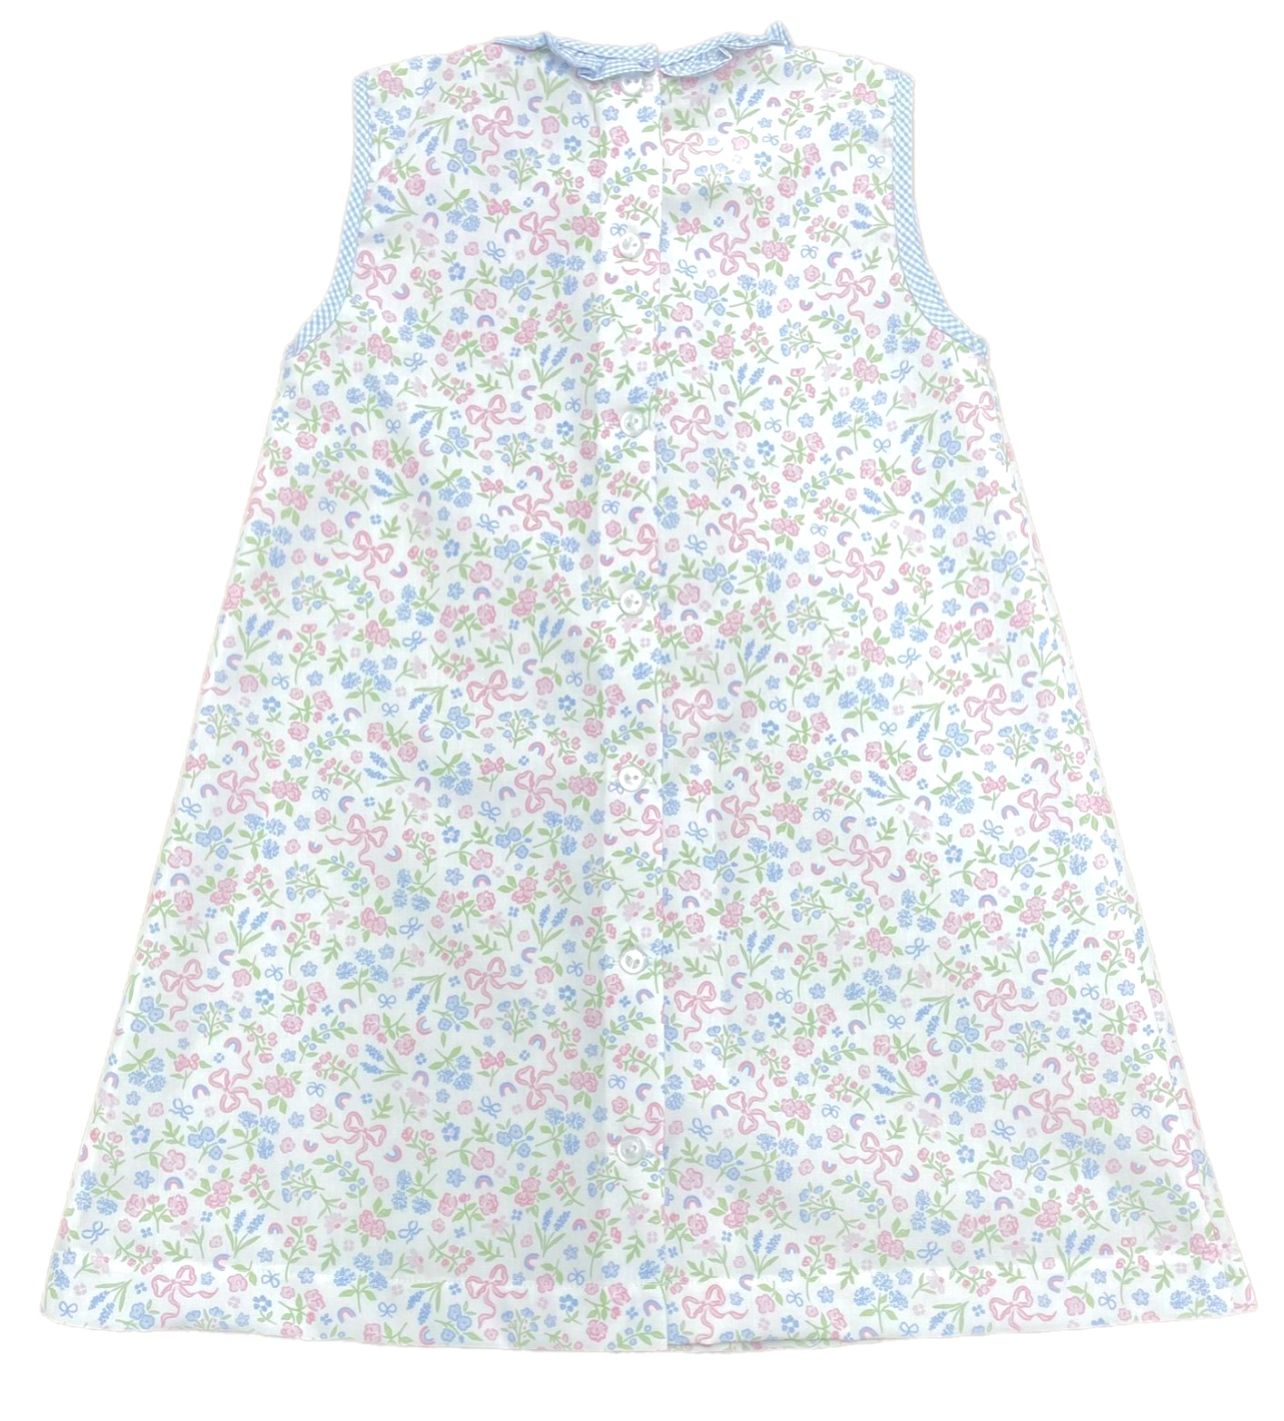 Blossoms and Bows Penny Pleat Dress